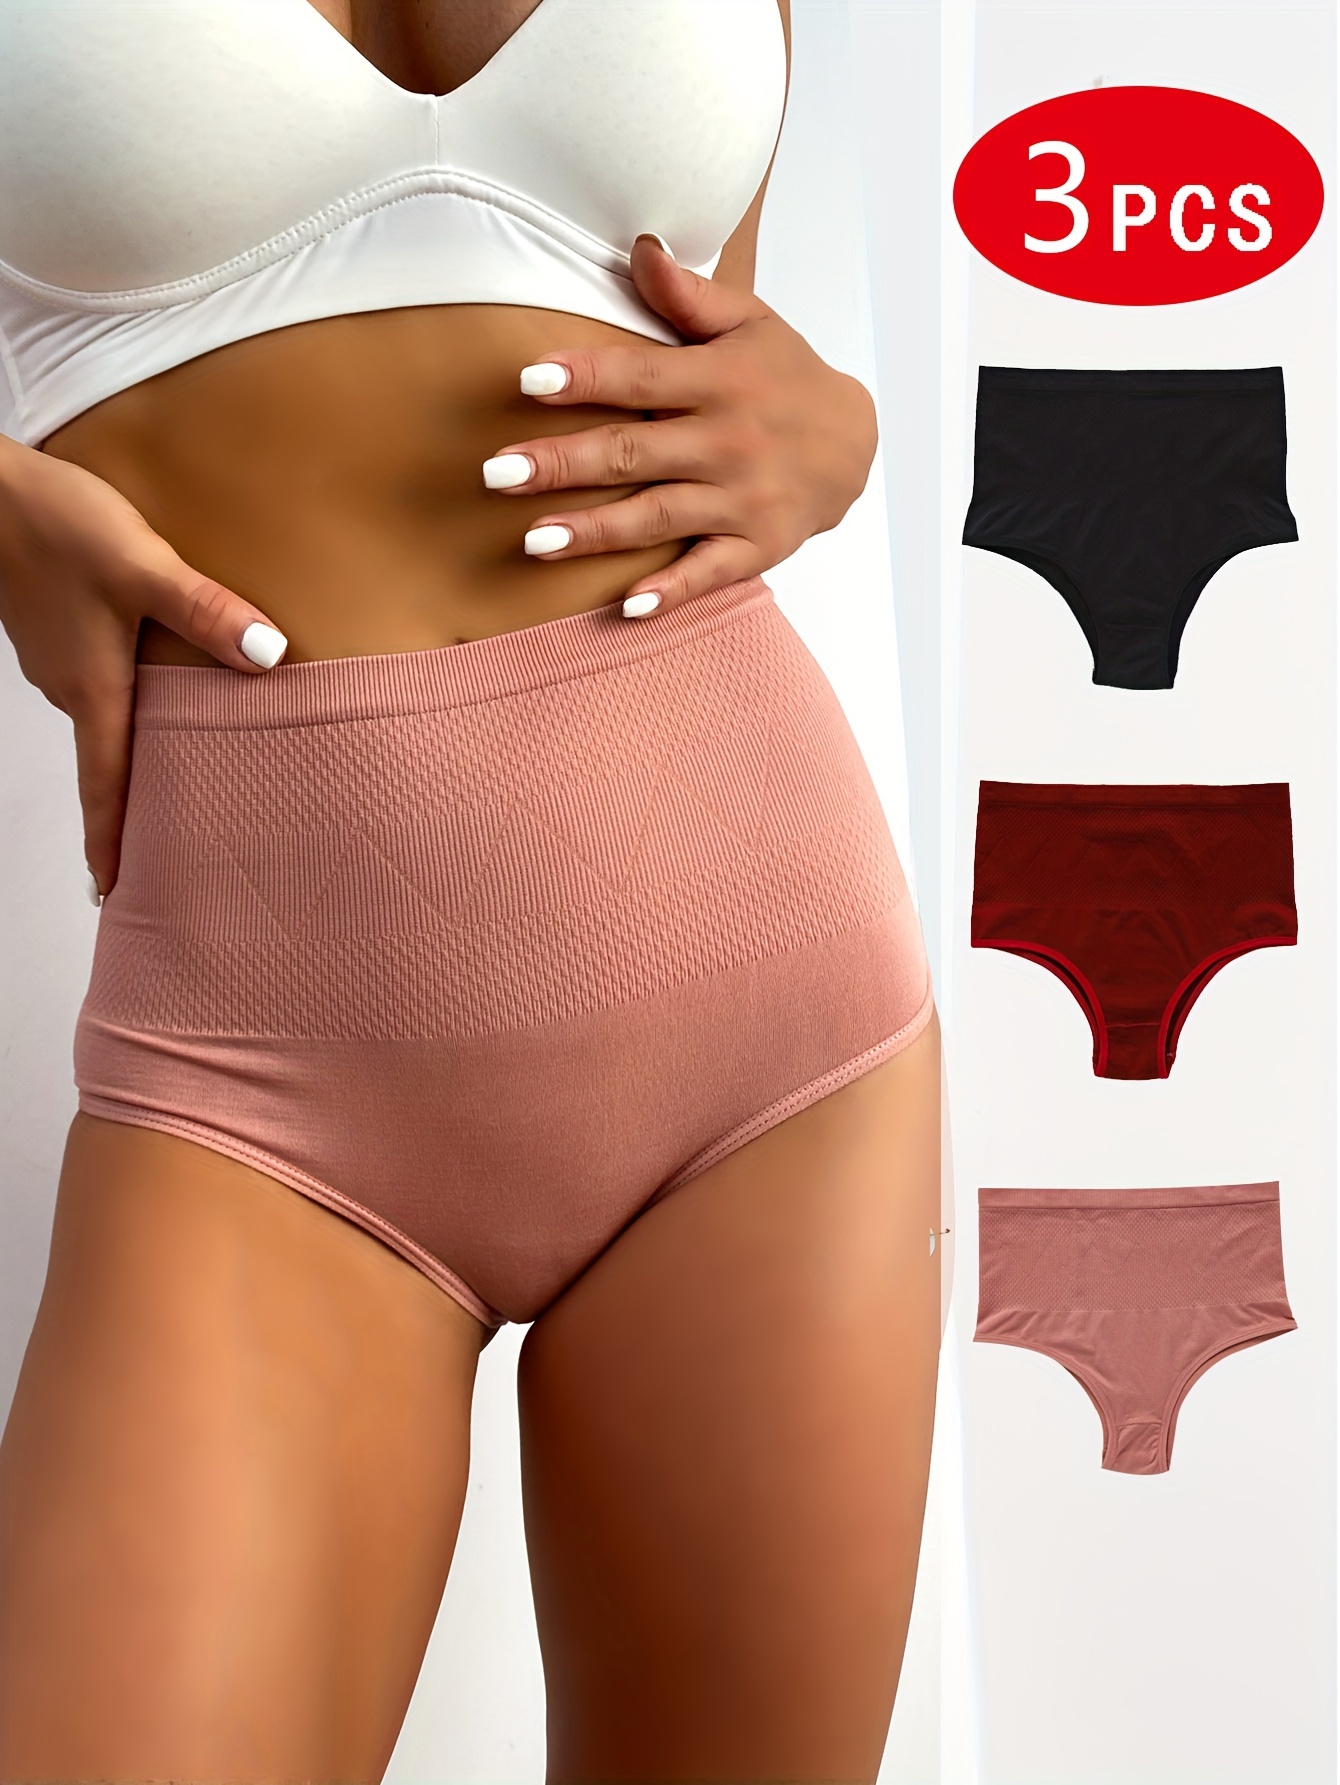 Seamless Body Shaper Thong Panties, High Waist Comfy & Breathable Tummy  Control Panties, Women's Lingerie & Underwear